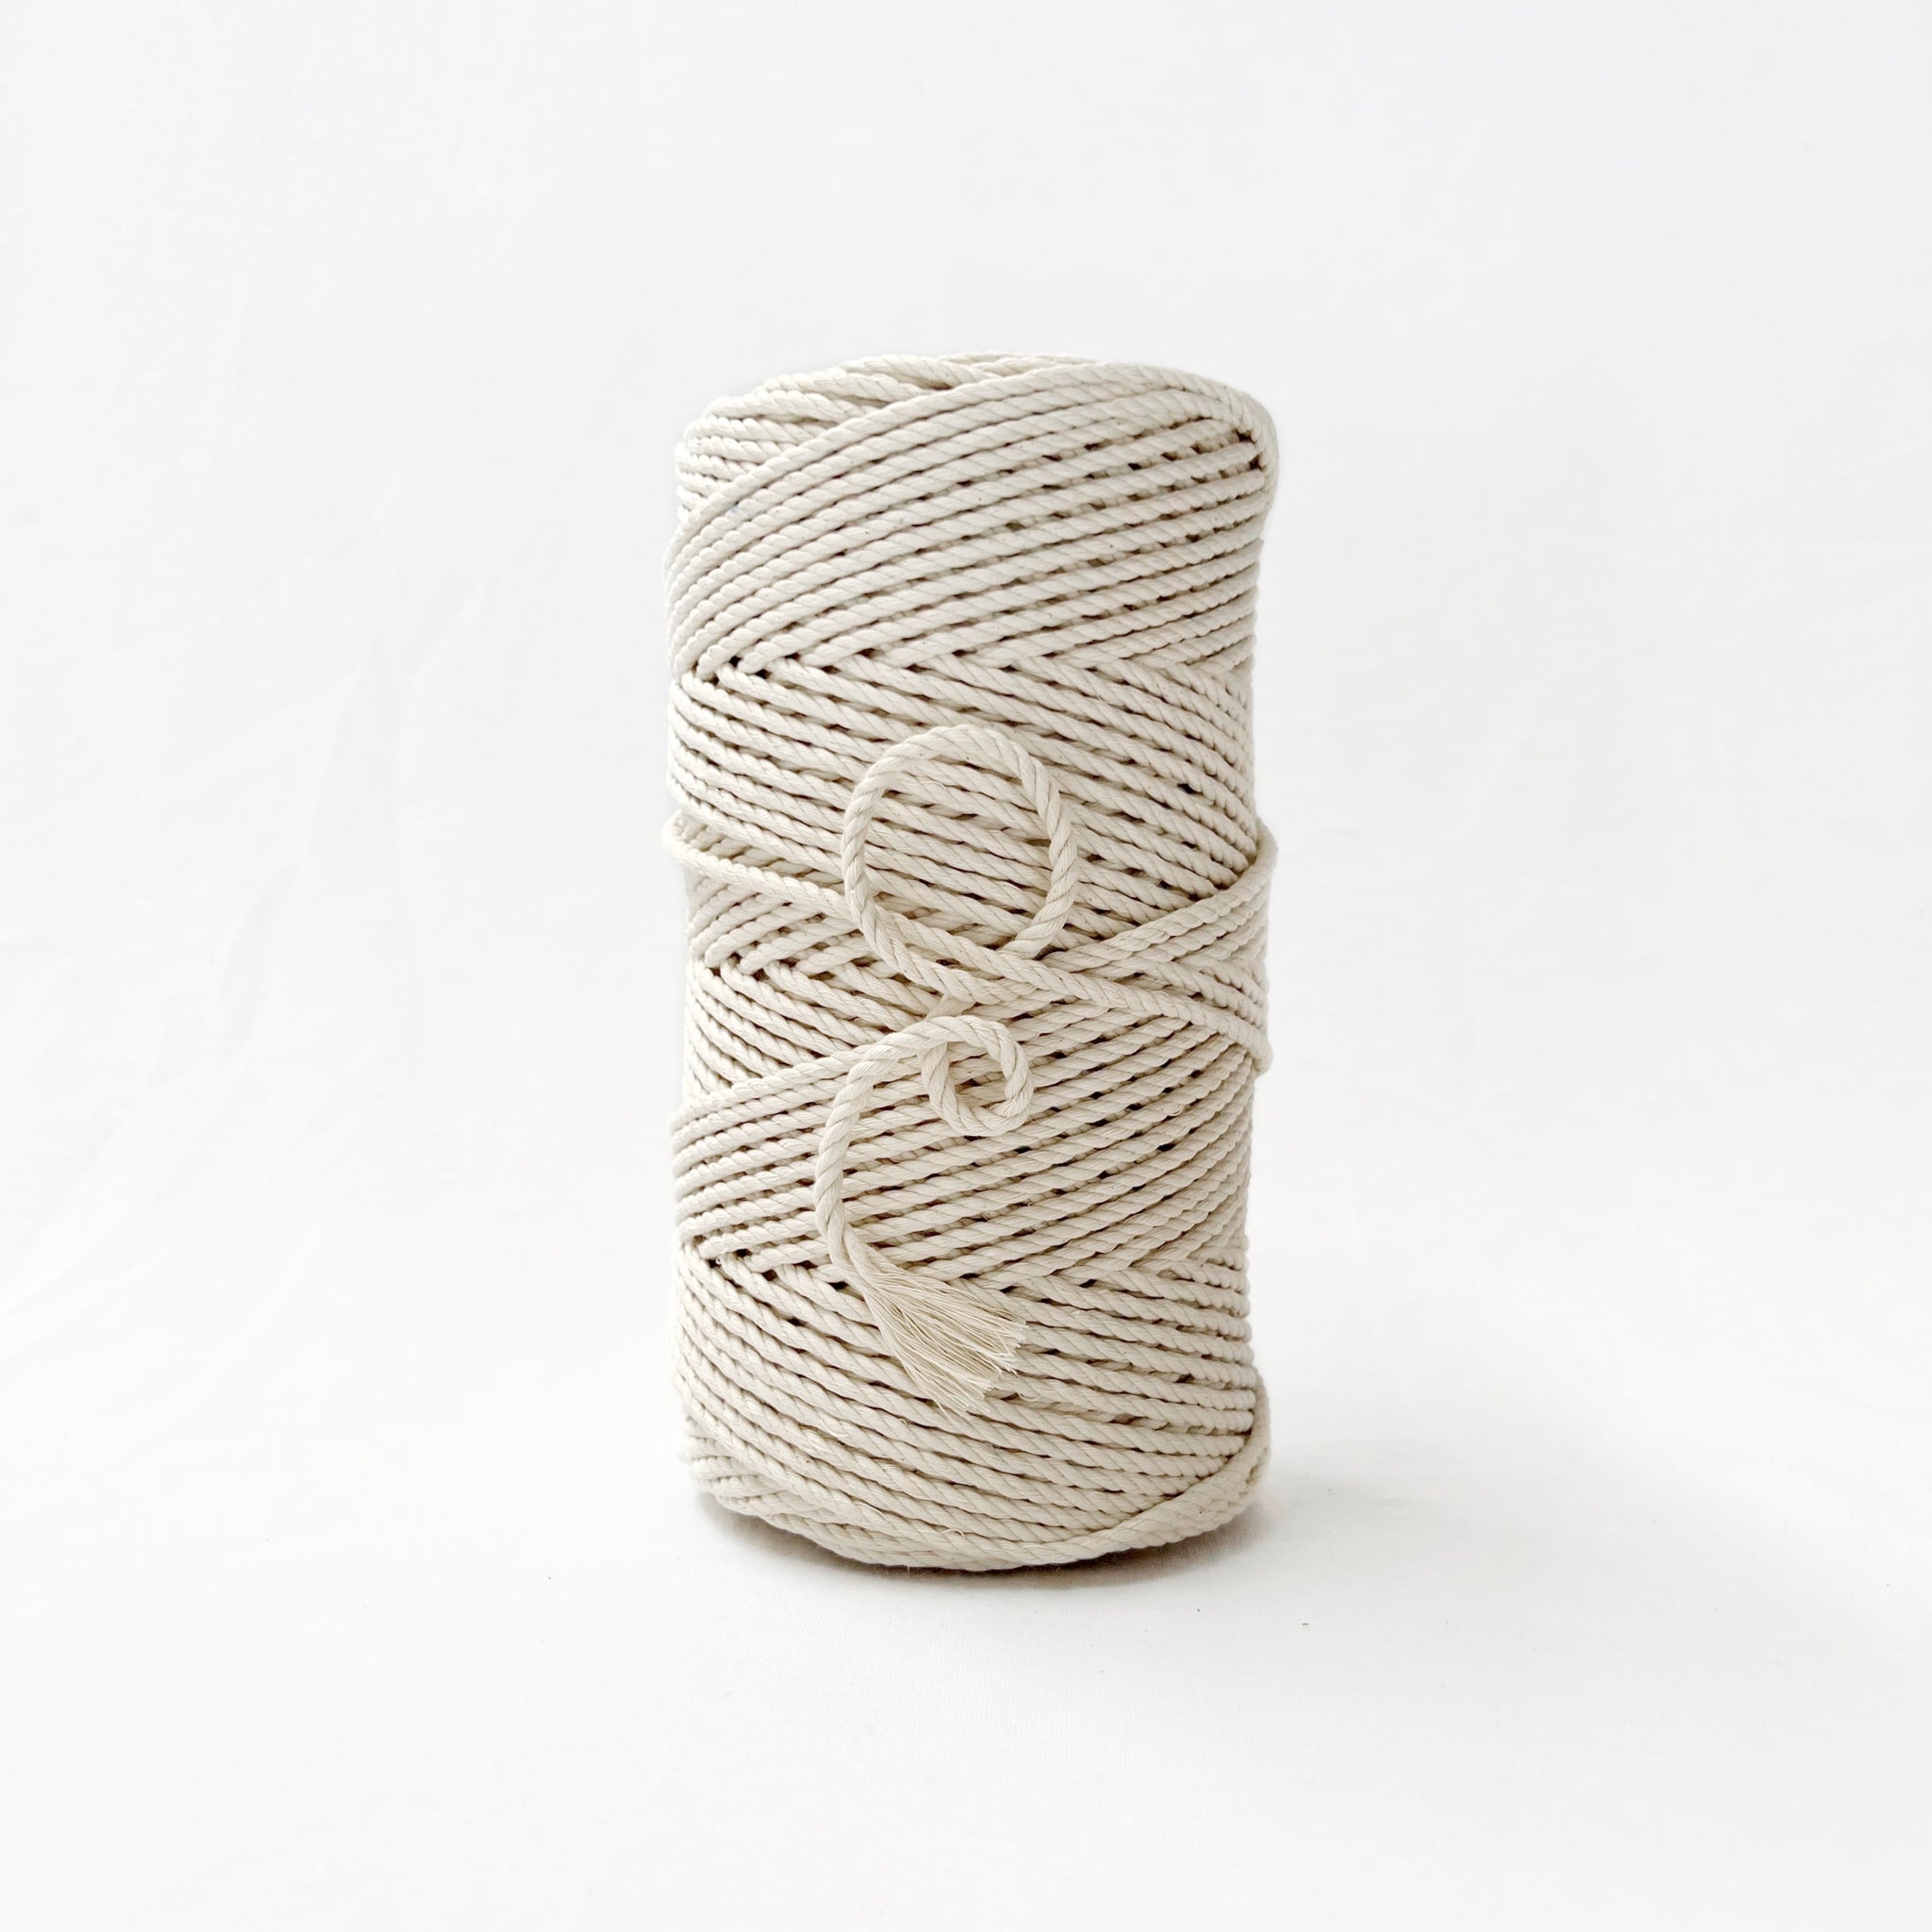 Macrame Cotton Rope // Natural 4mm - Wholesale Available - Mary Maker  Studio - Macrame & Weaving Supplies and Education.